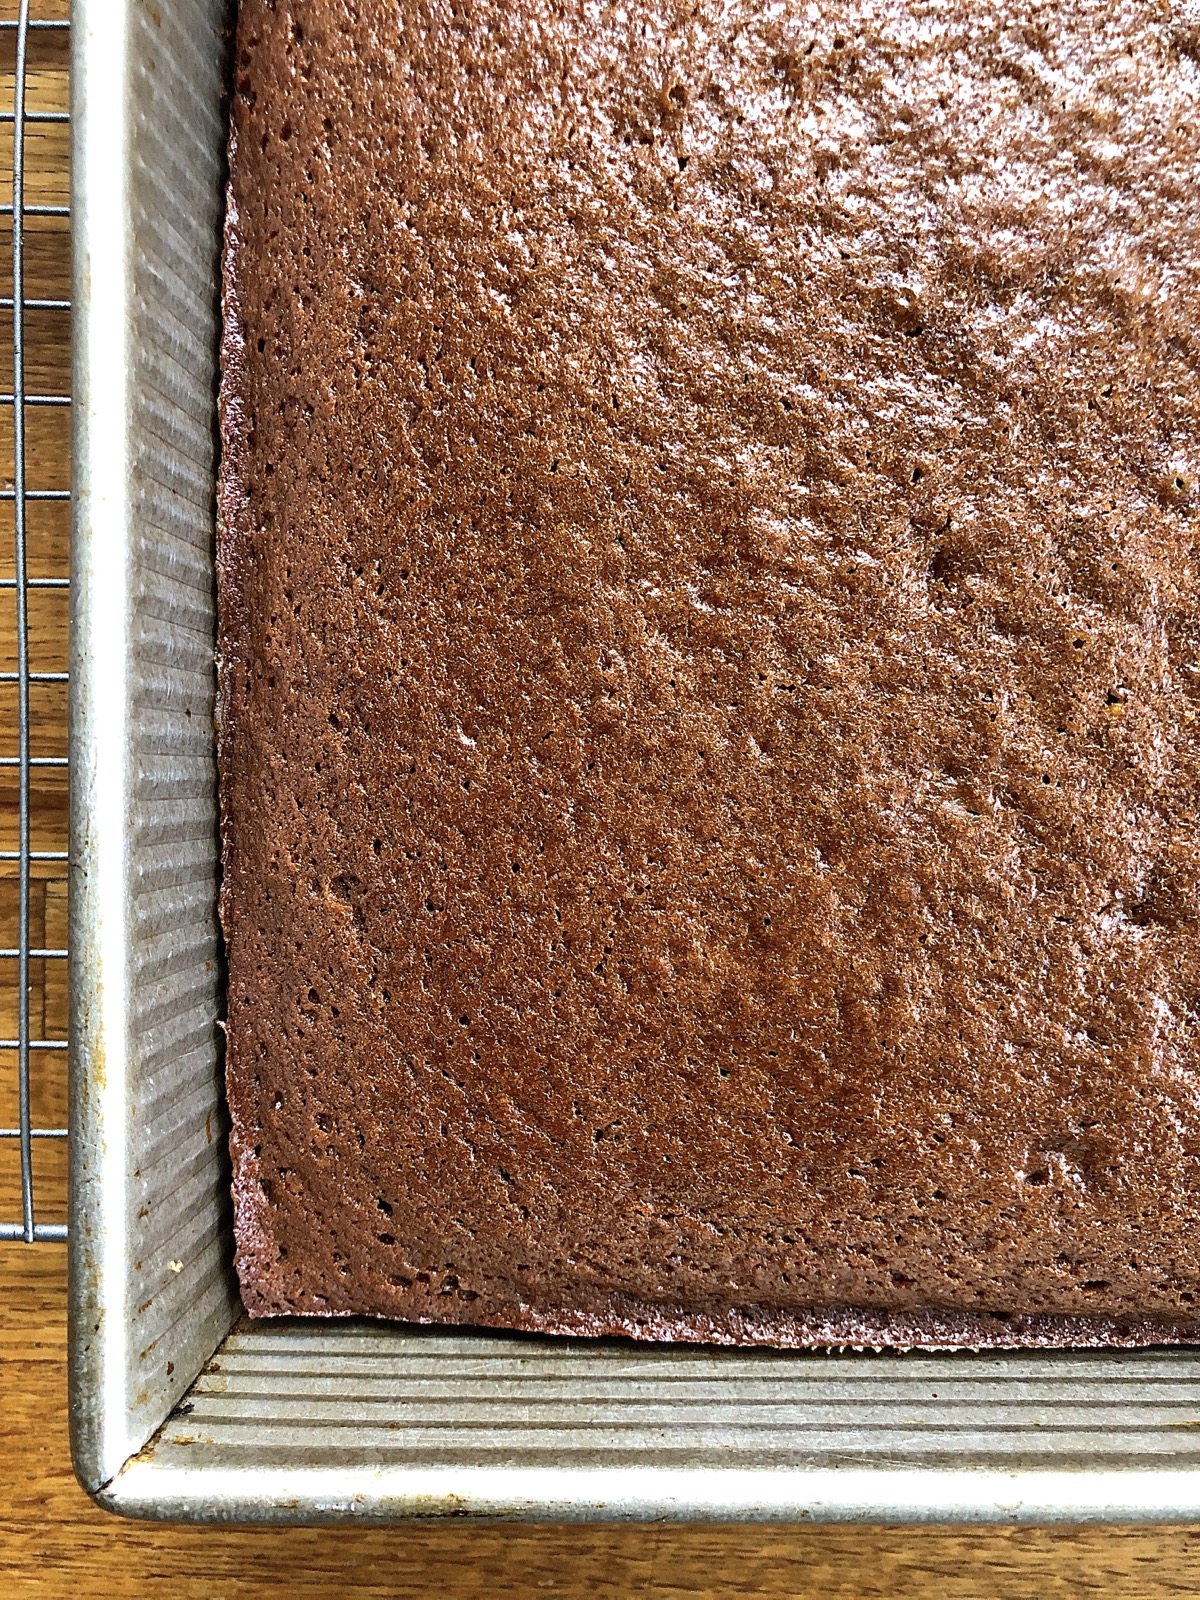 Baked gingerbread in a pan, edges just pulling away from the sides of the pan.